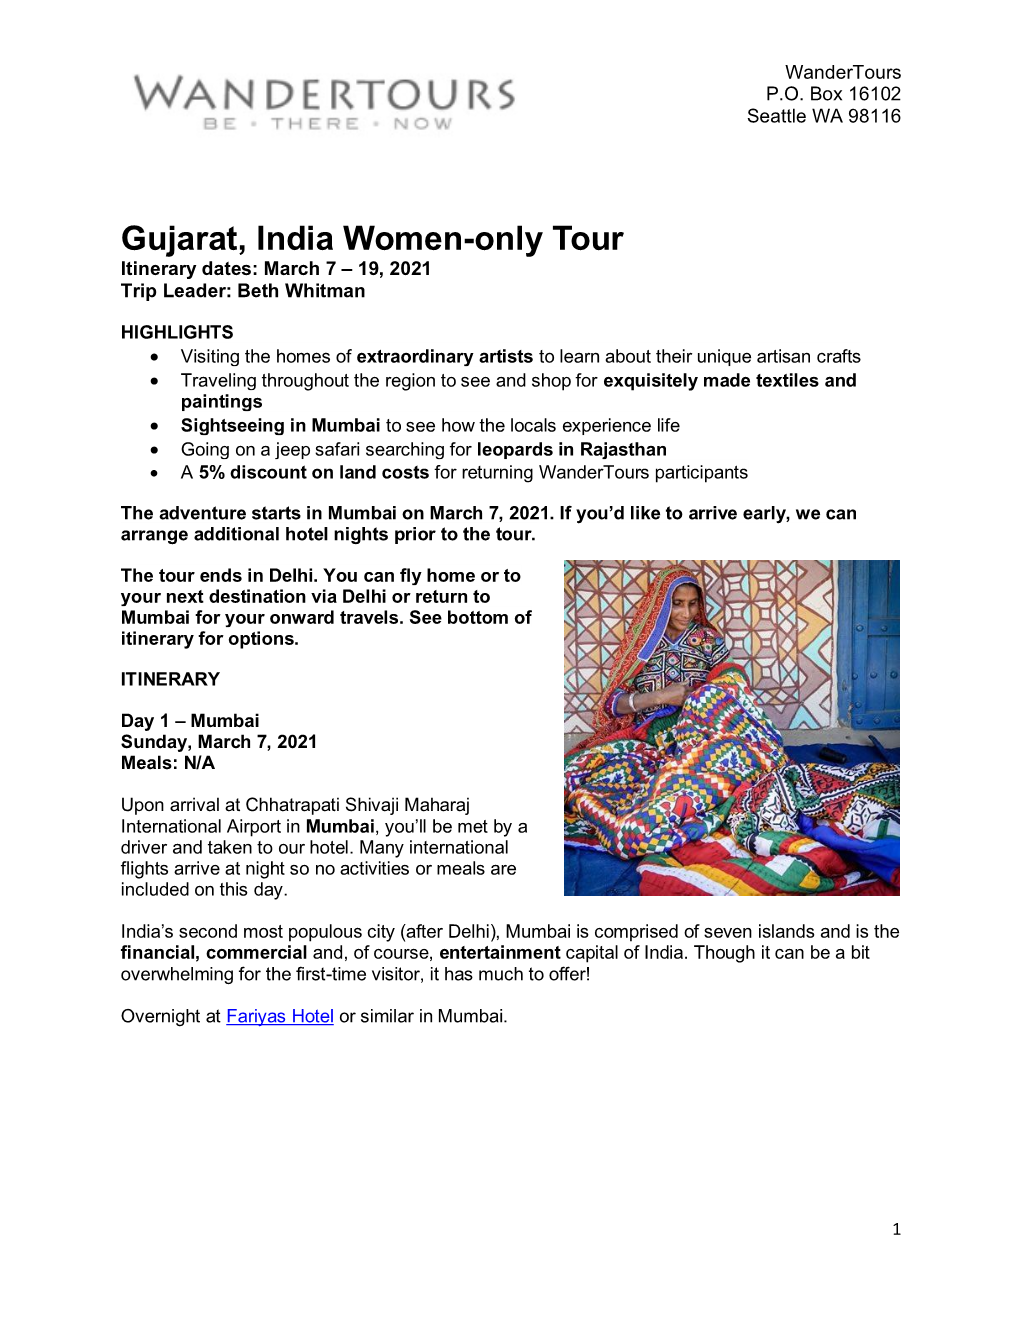 Gujarat, India Women-Only Tour Itinerary Dates: March 7 – 19, 2021 Trip Leader: Beth Whitman